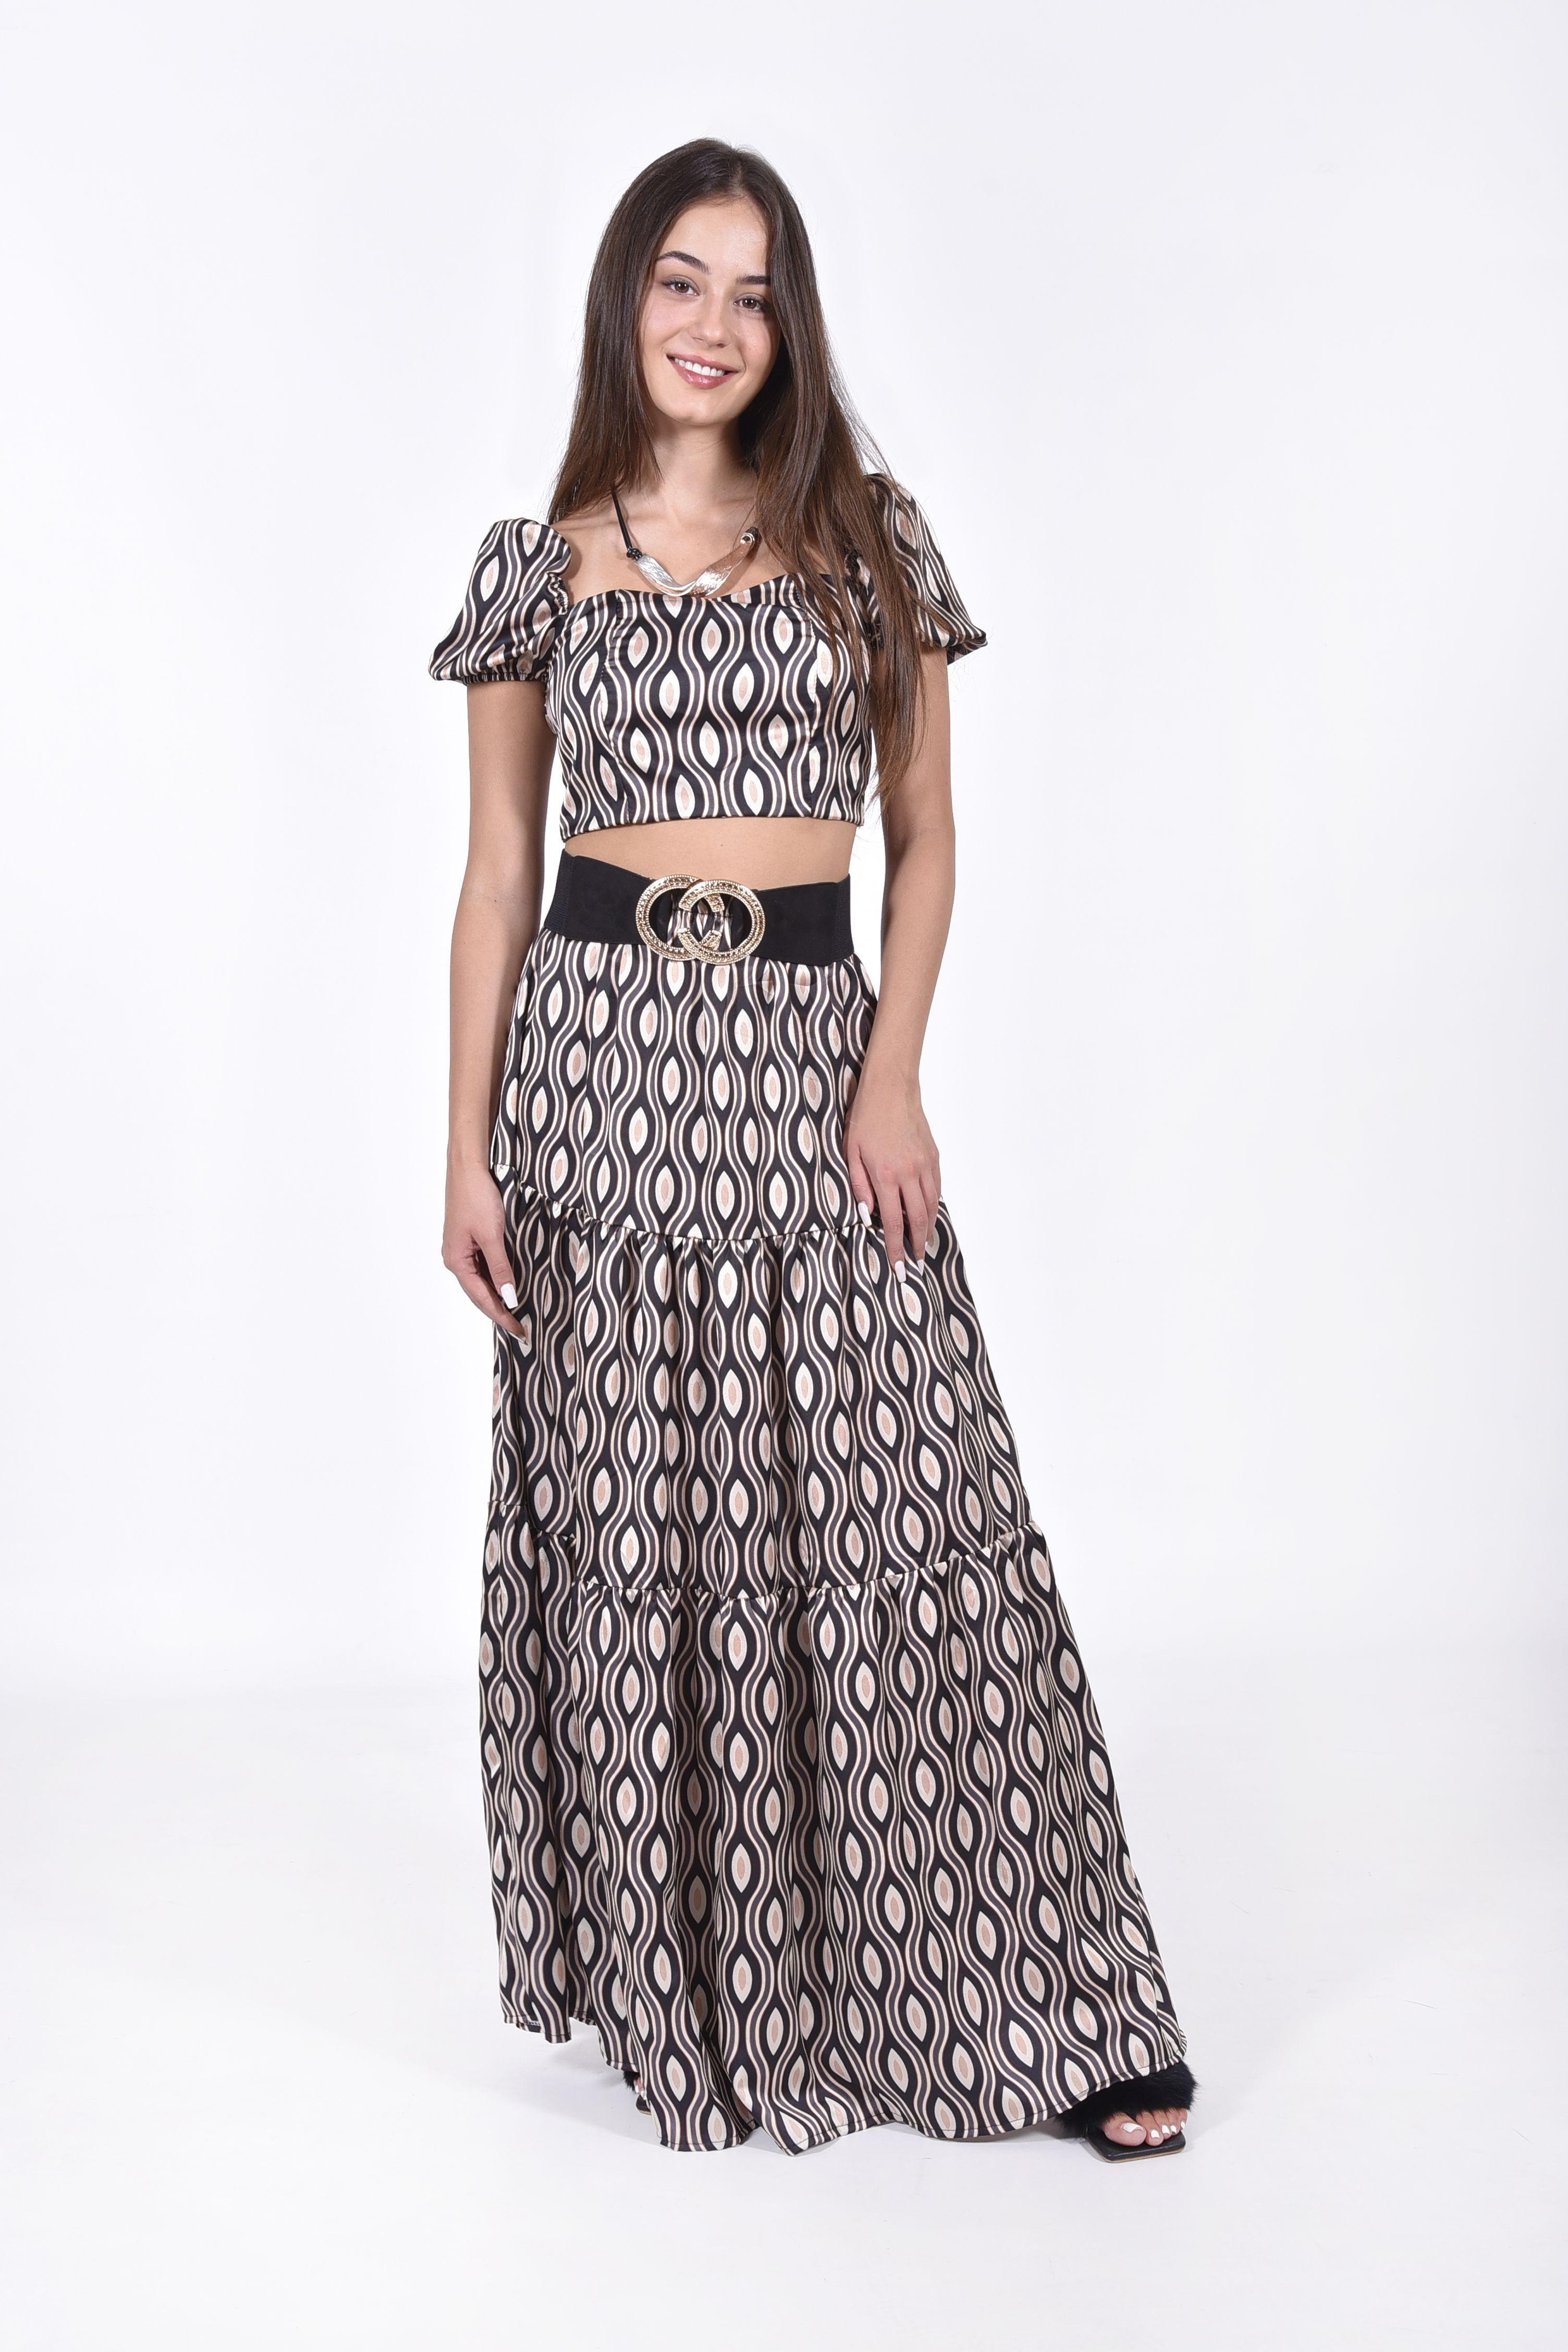 Co ord set with crop top and skirt 